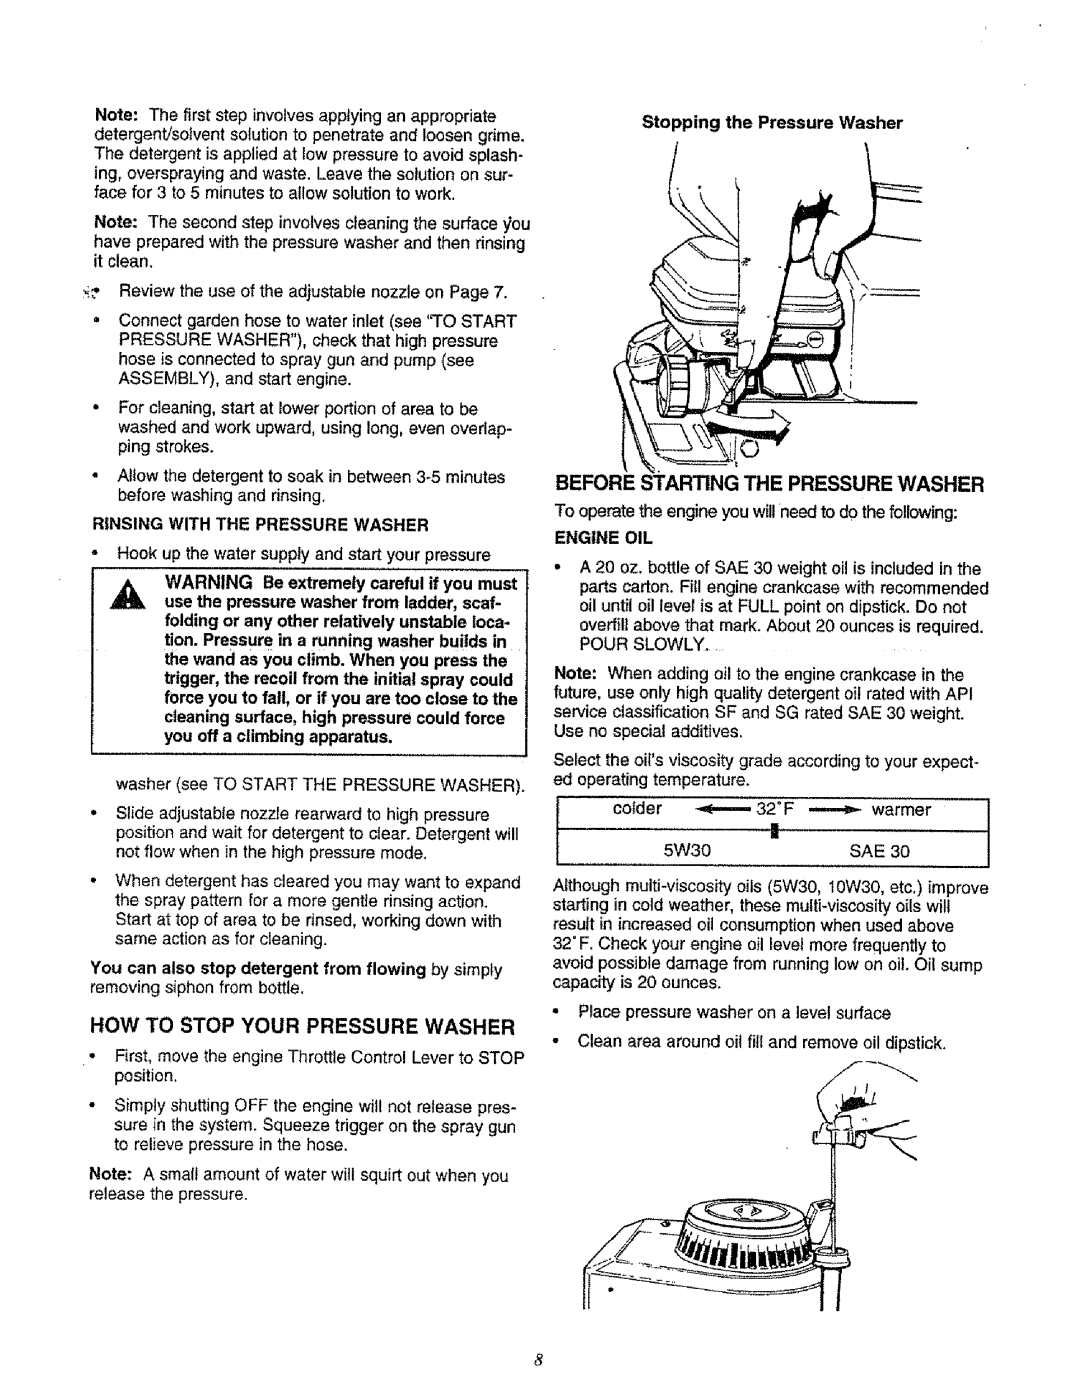 Sears 580.761652 manual How To Stop Your Pressure Washer, Before Starting The Pressure Washer, Stopping the Pressure Washer 